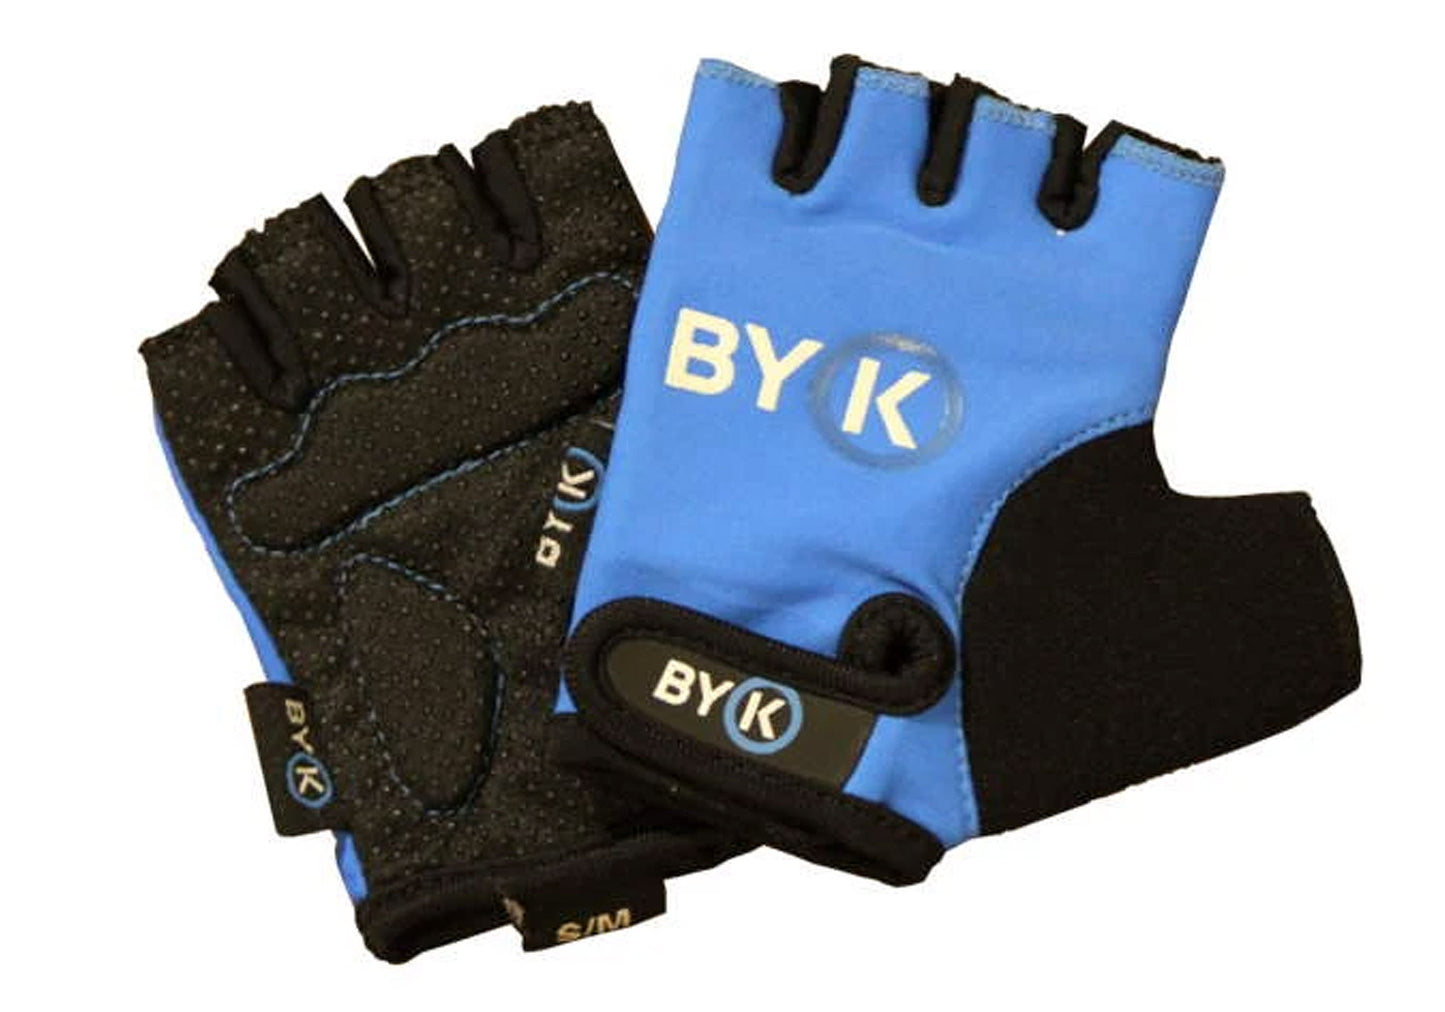 Byk Kids Cycling Gloves